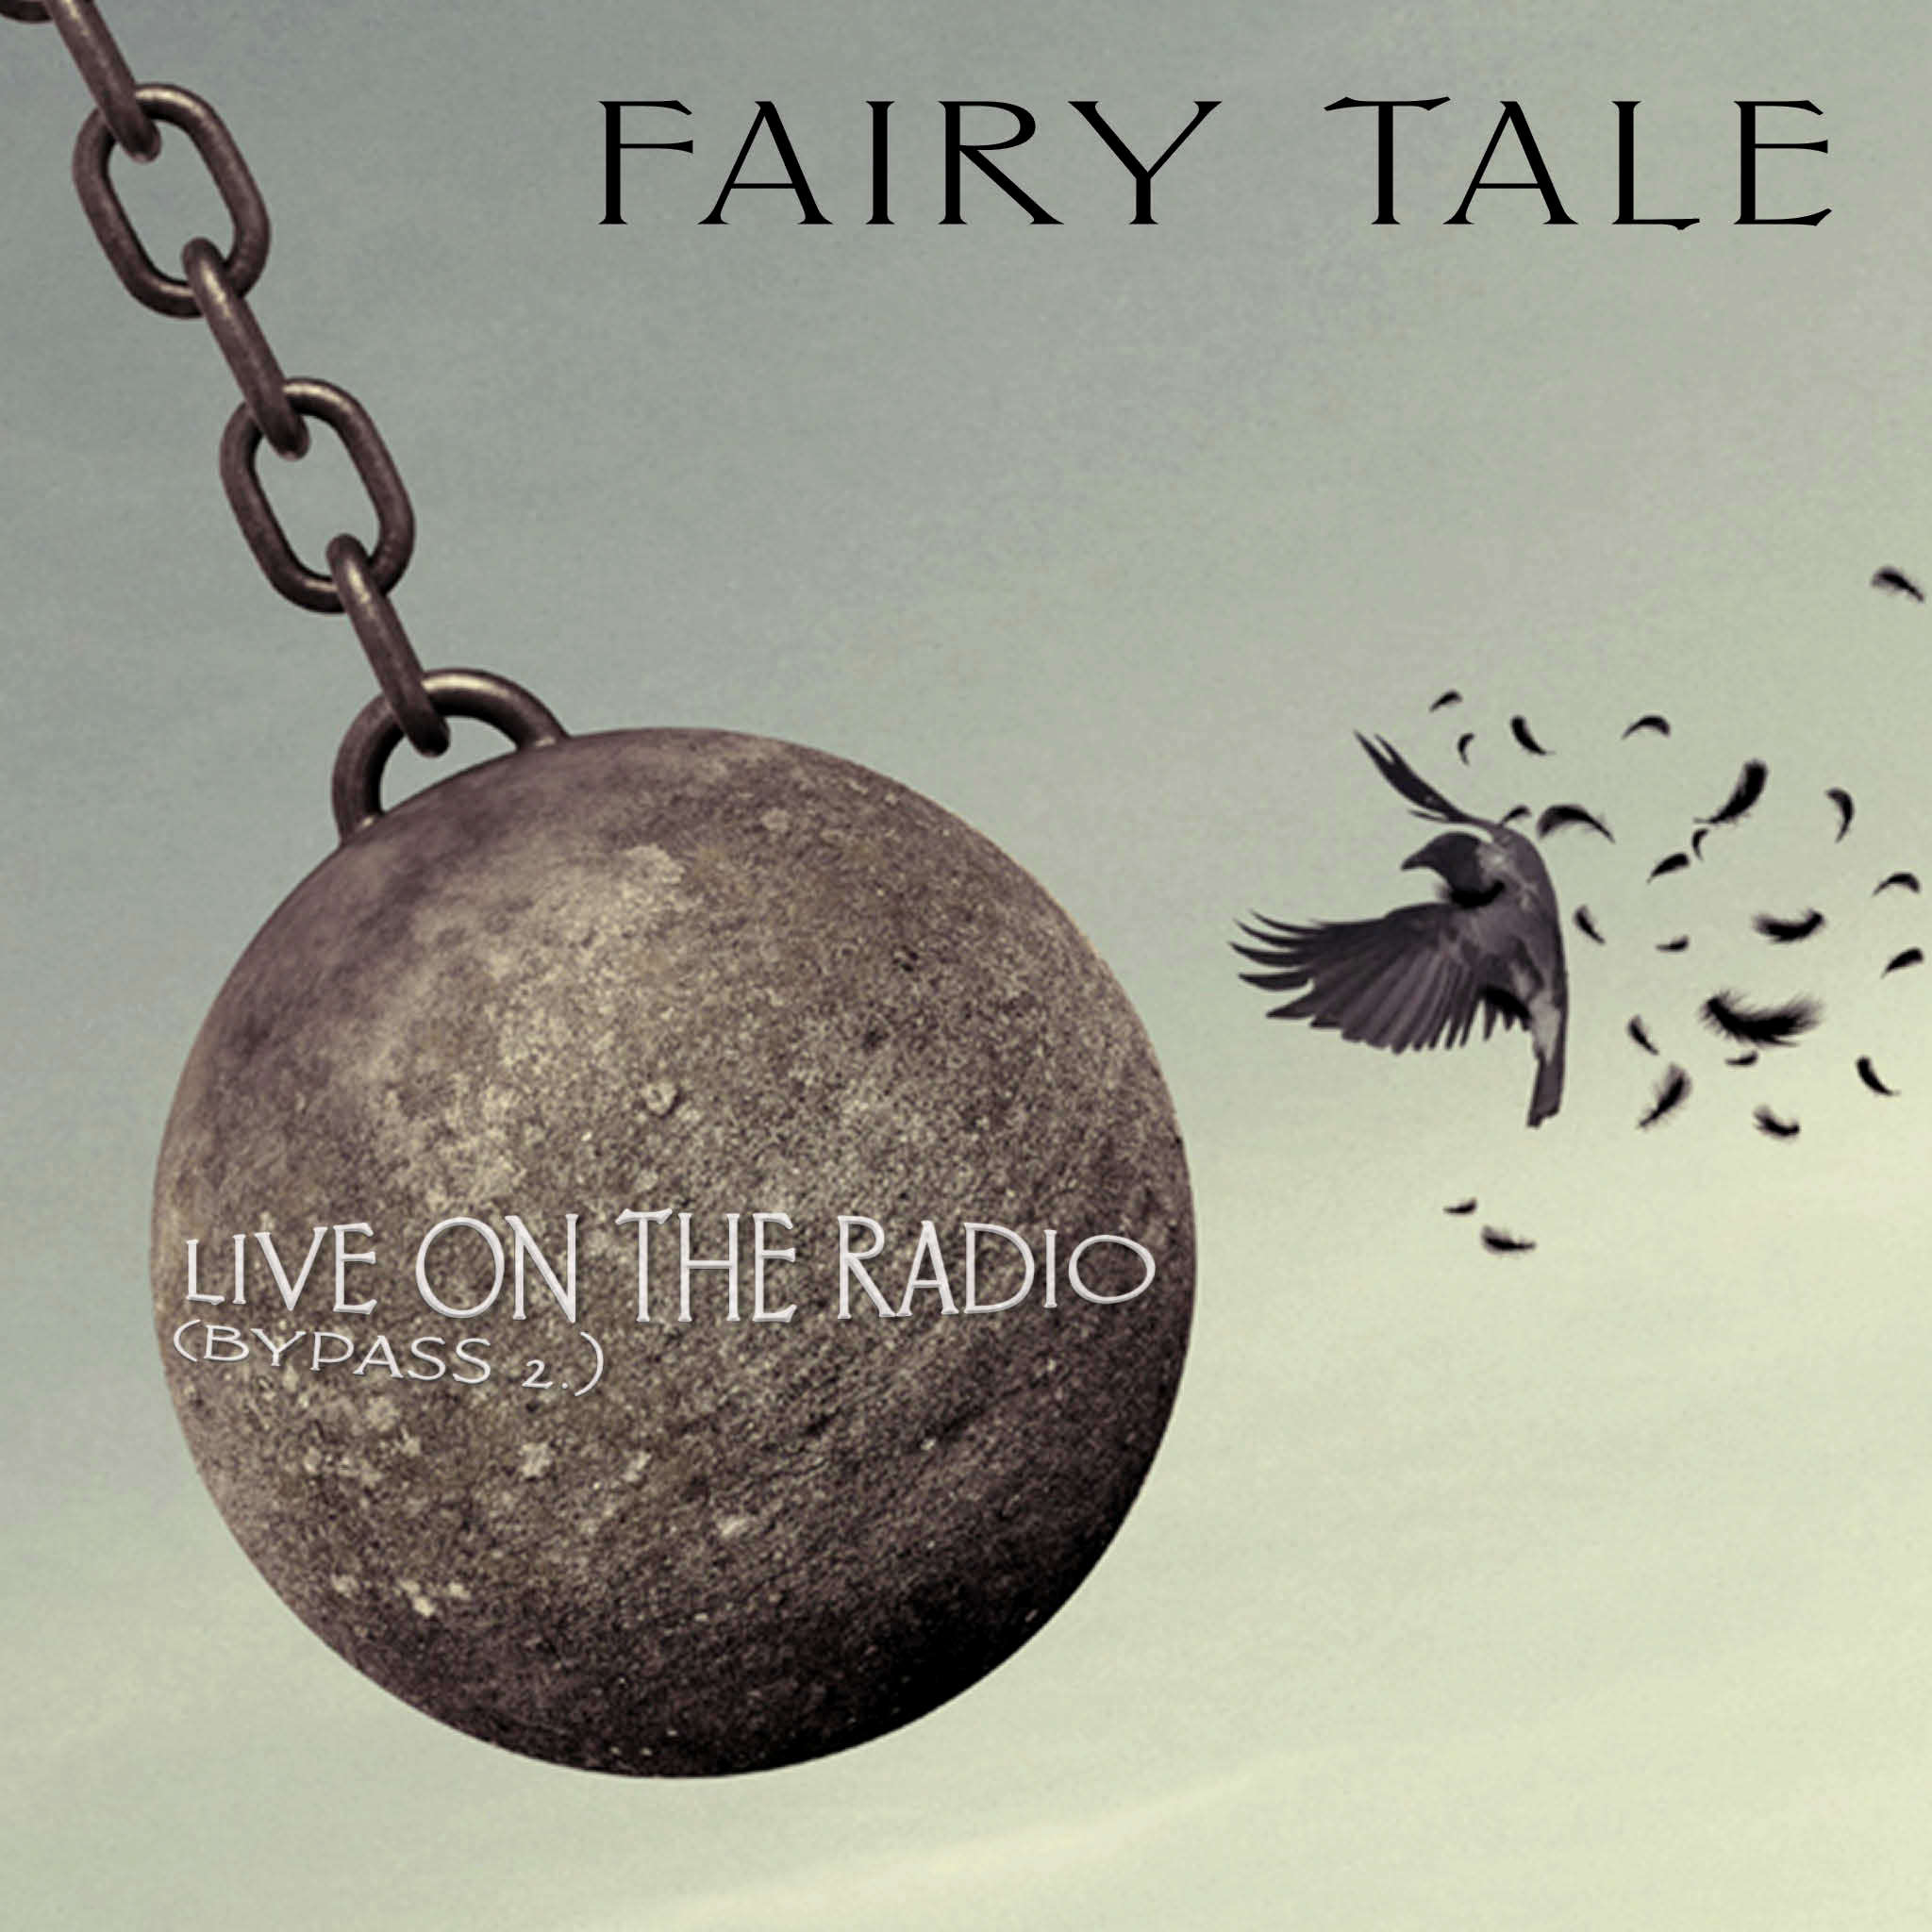 Fairy Tale - Live on the Radio (Bypass 2.) cover